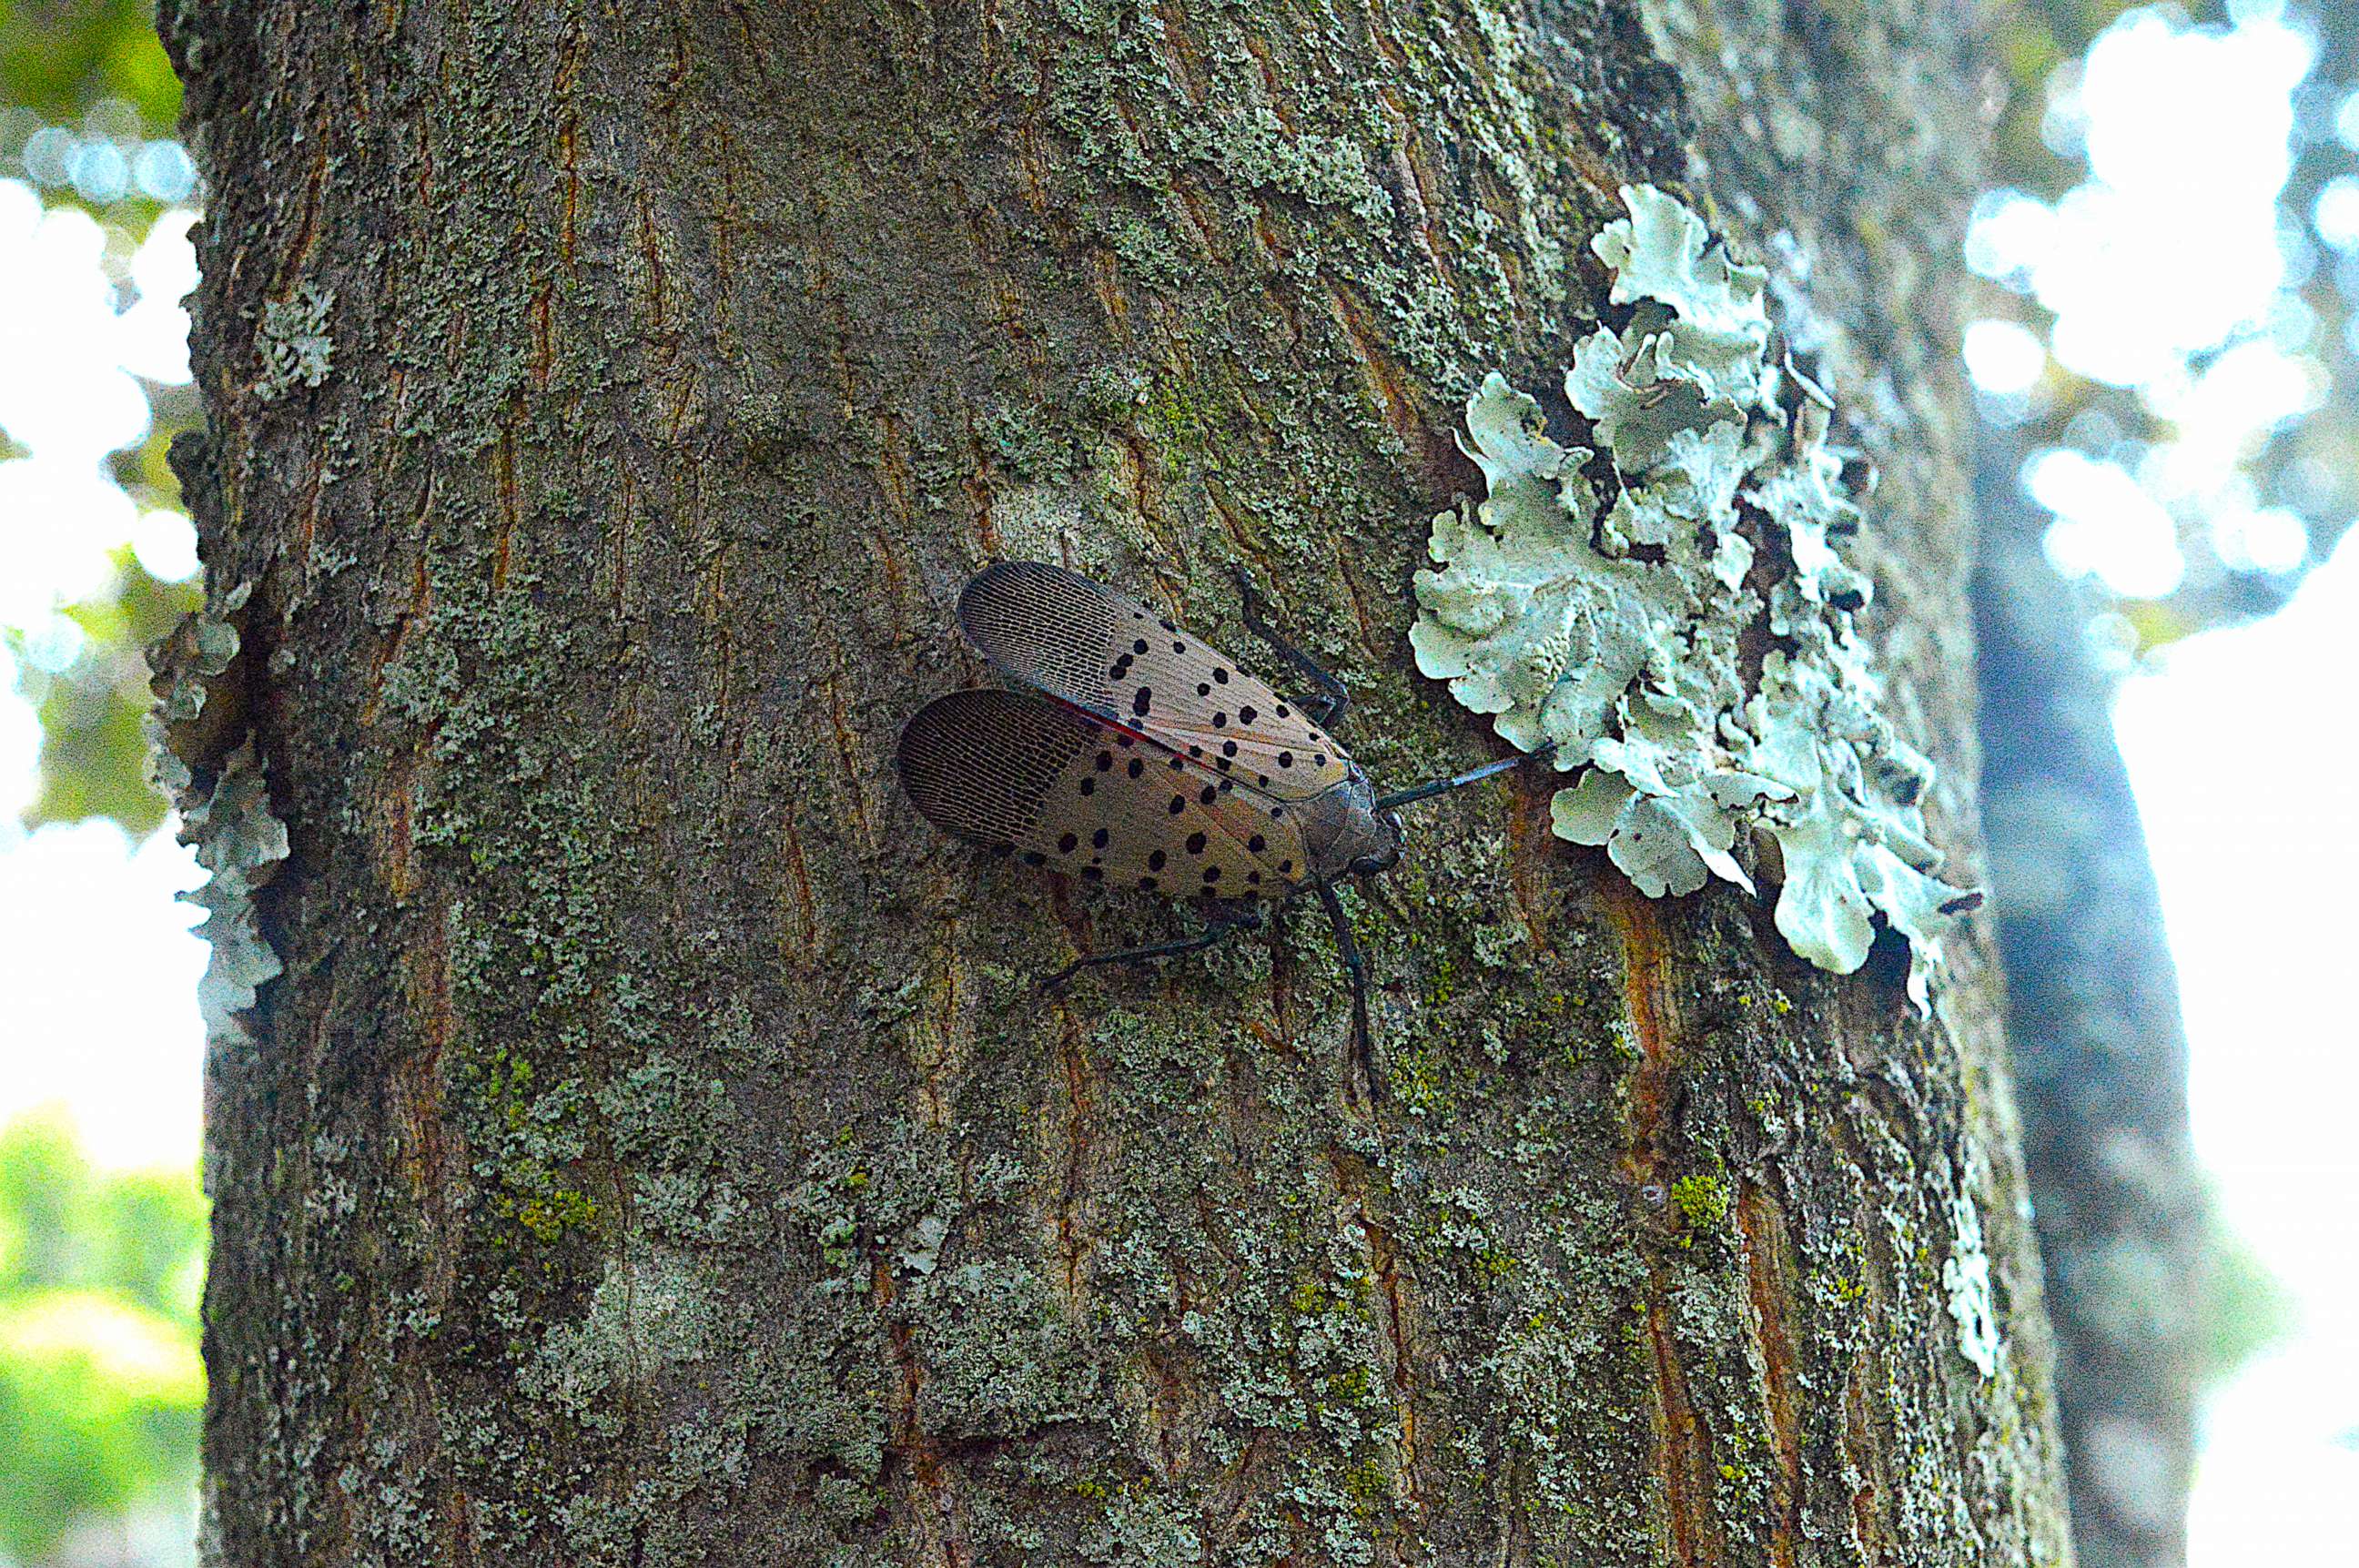 PHOTO: A spotted lanternfly is seen on a tree in this stock photo.